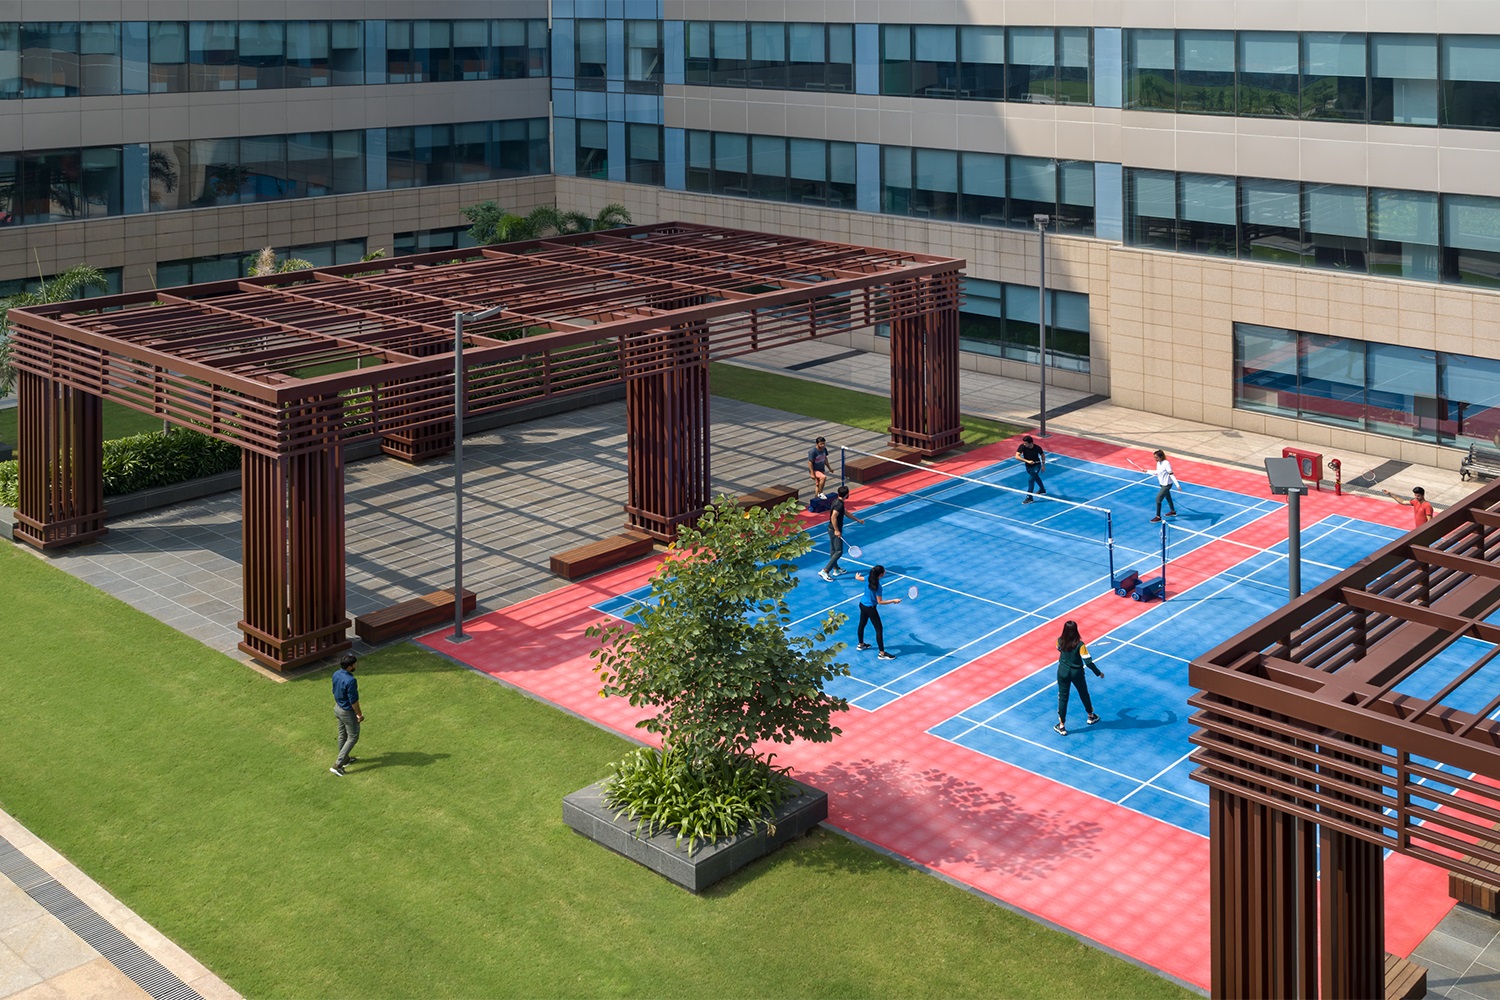 Candor TechSpace outdoor space with 2 tennis courts